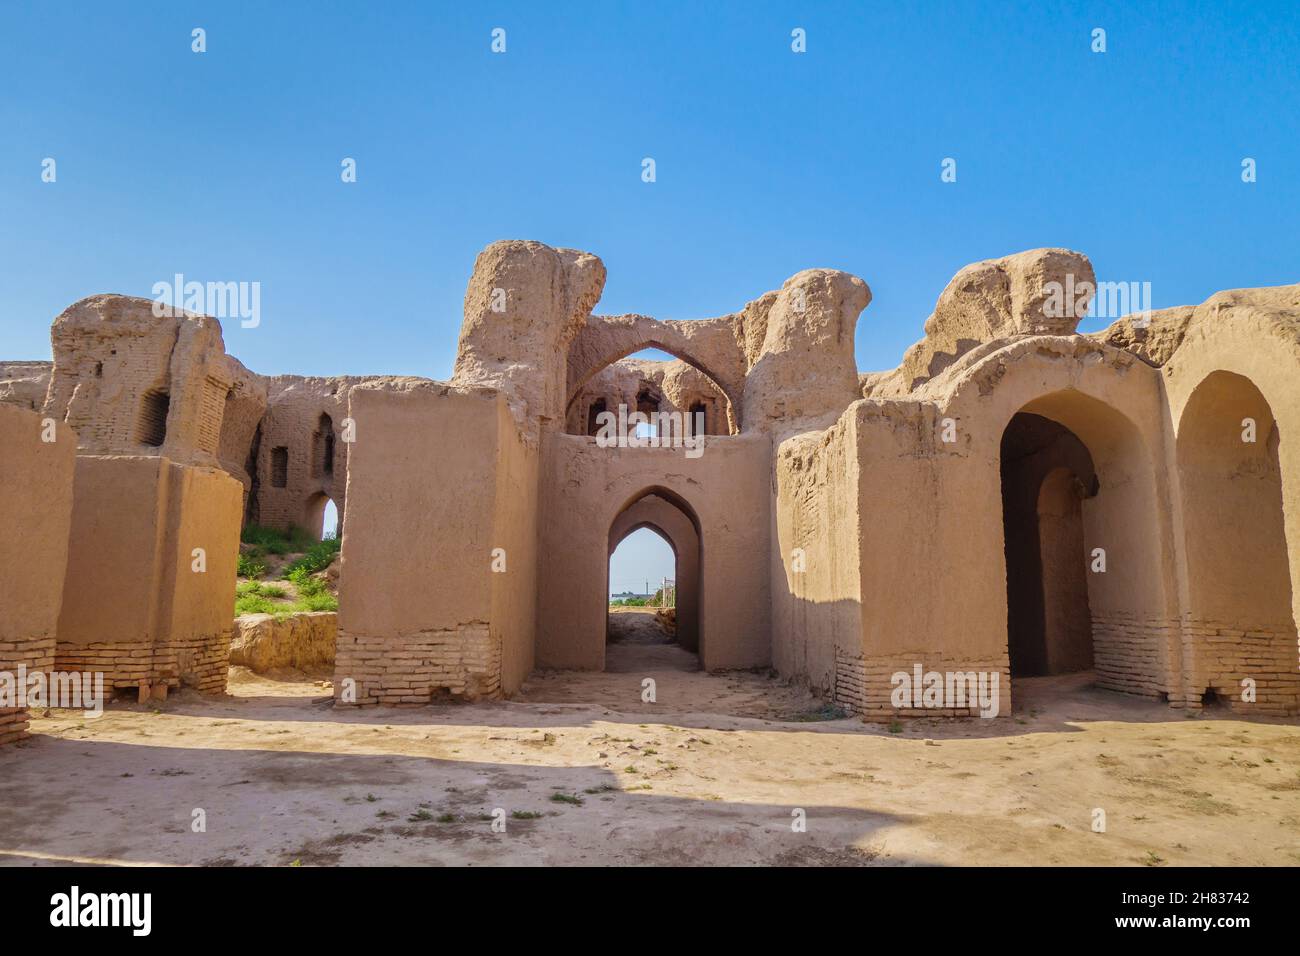 Panorama of Kyr Kyz (Fortress of 40 girls), medieval palace or caravanserai in Termez, Uzbekistan. Built in the 9th century. The building was two-stor Stock Photo